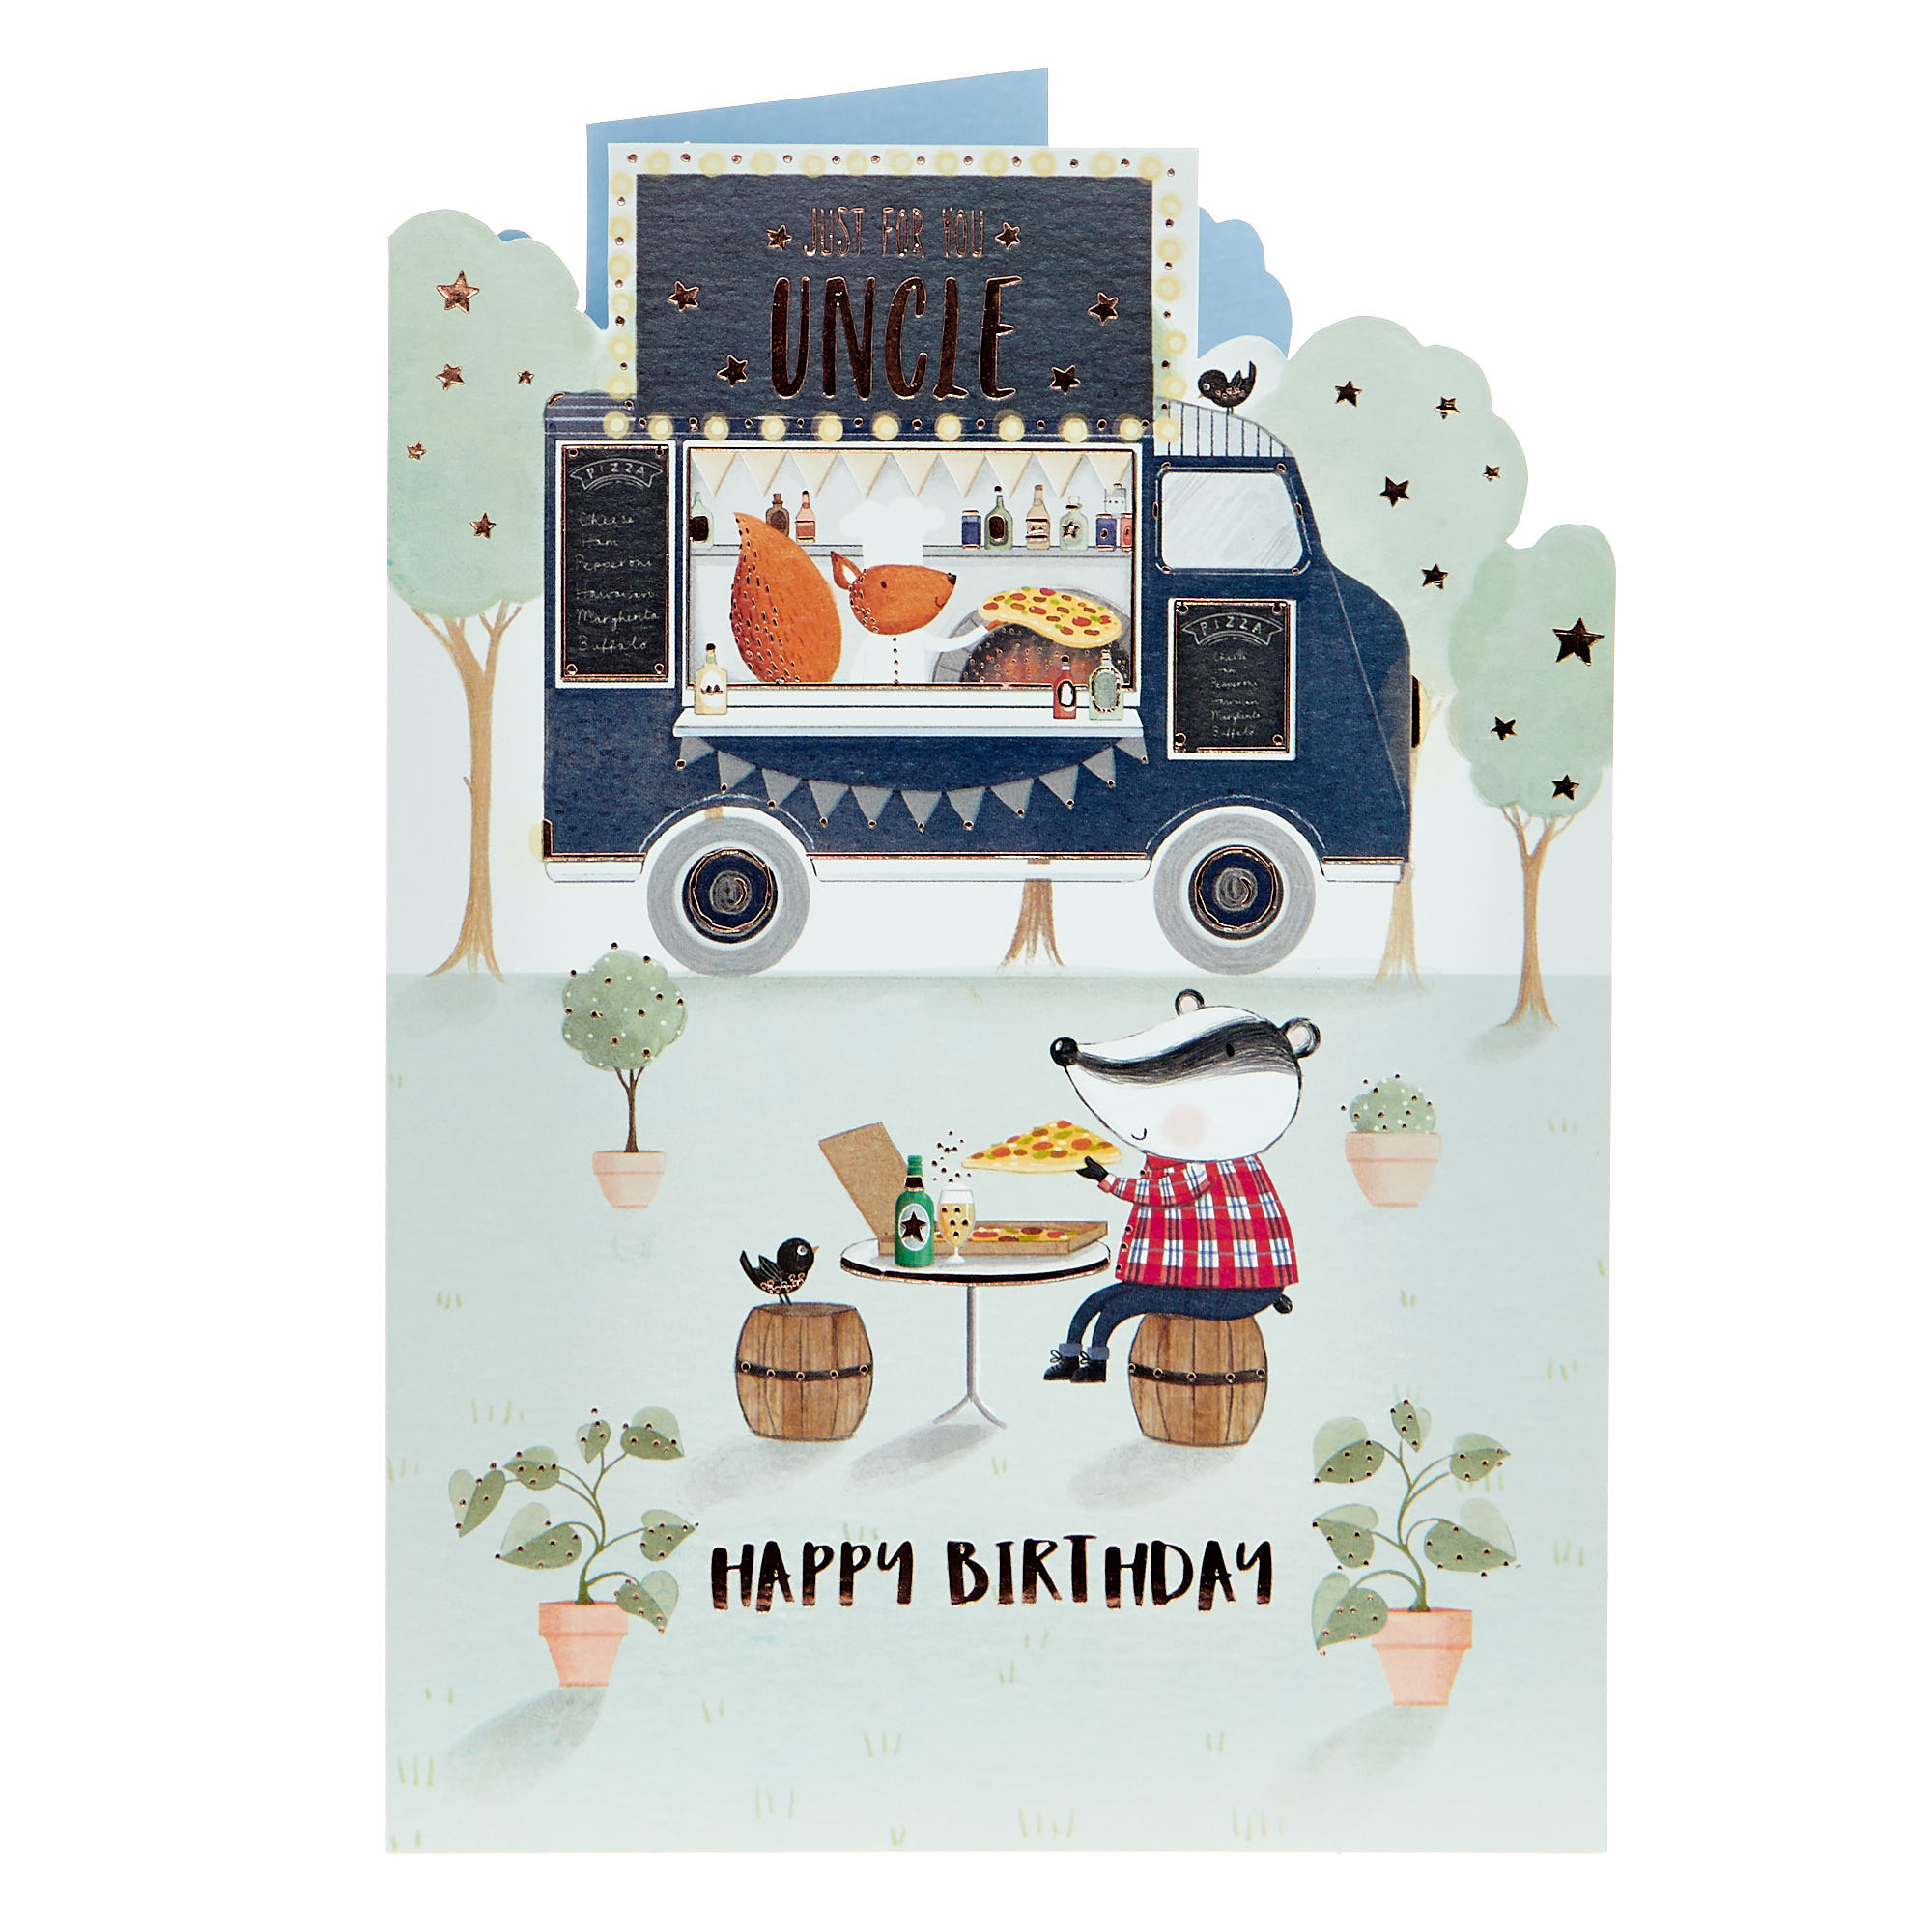 Uncle Just For You Food Truck Birthday Card